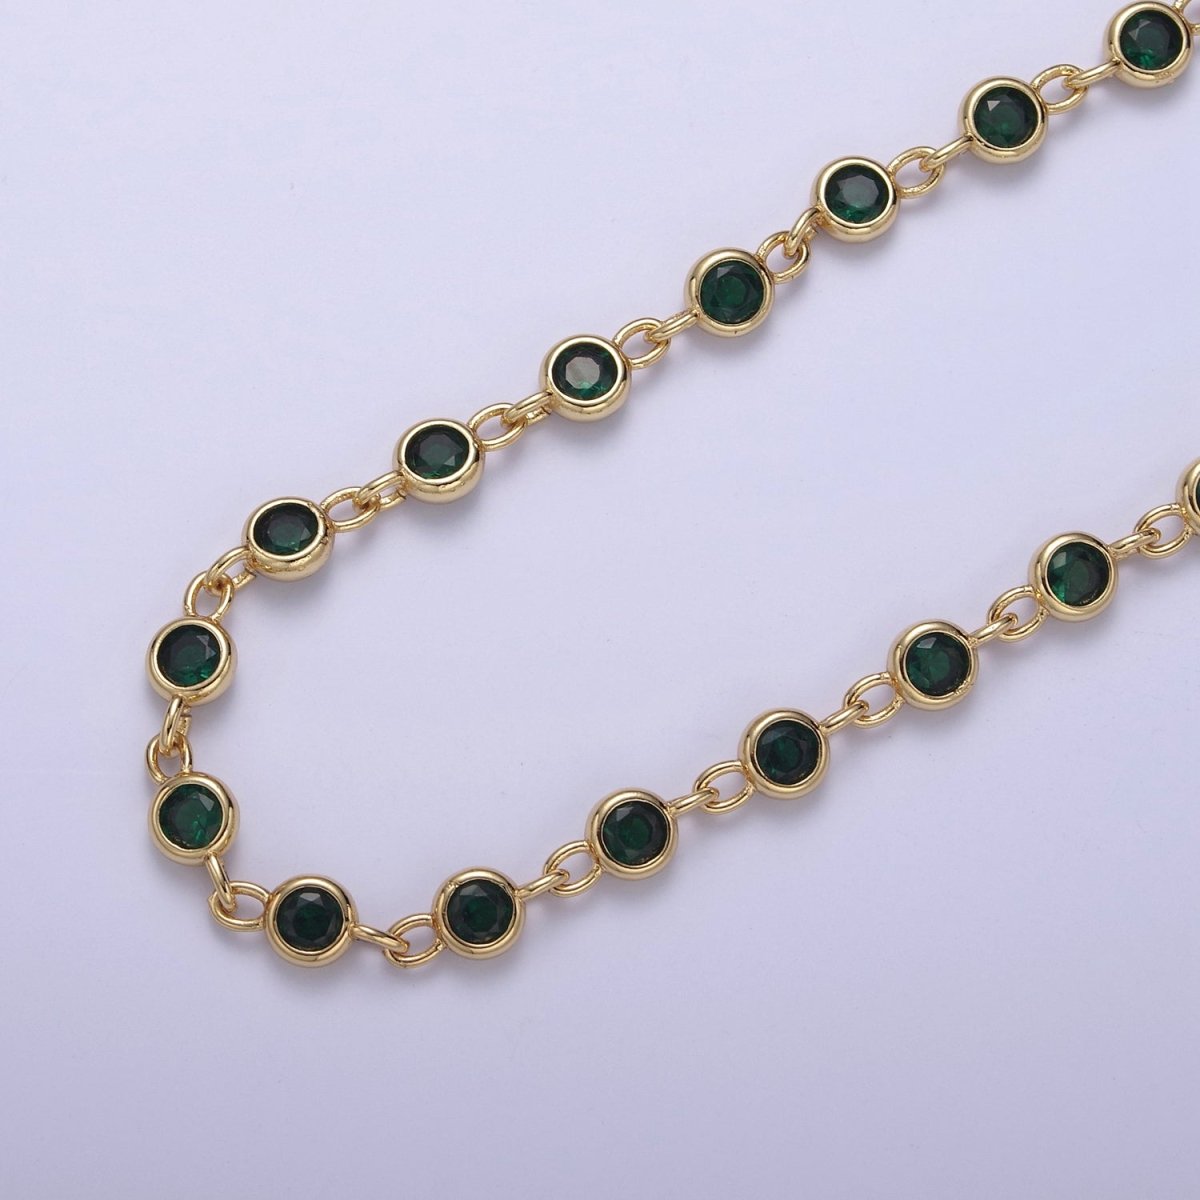 CZ Beaded Chain 6mm Round Bezel Cut Cubic Zirconia Beads Gold Filled Unsoldered Bezel Connector Beads Findings | ROLL-739 740 741 742 Clearance Pricing - DLUXCA